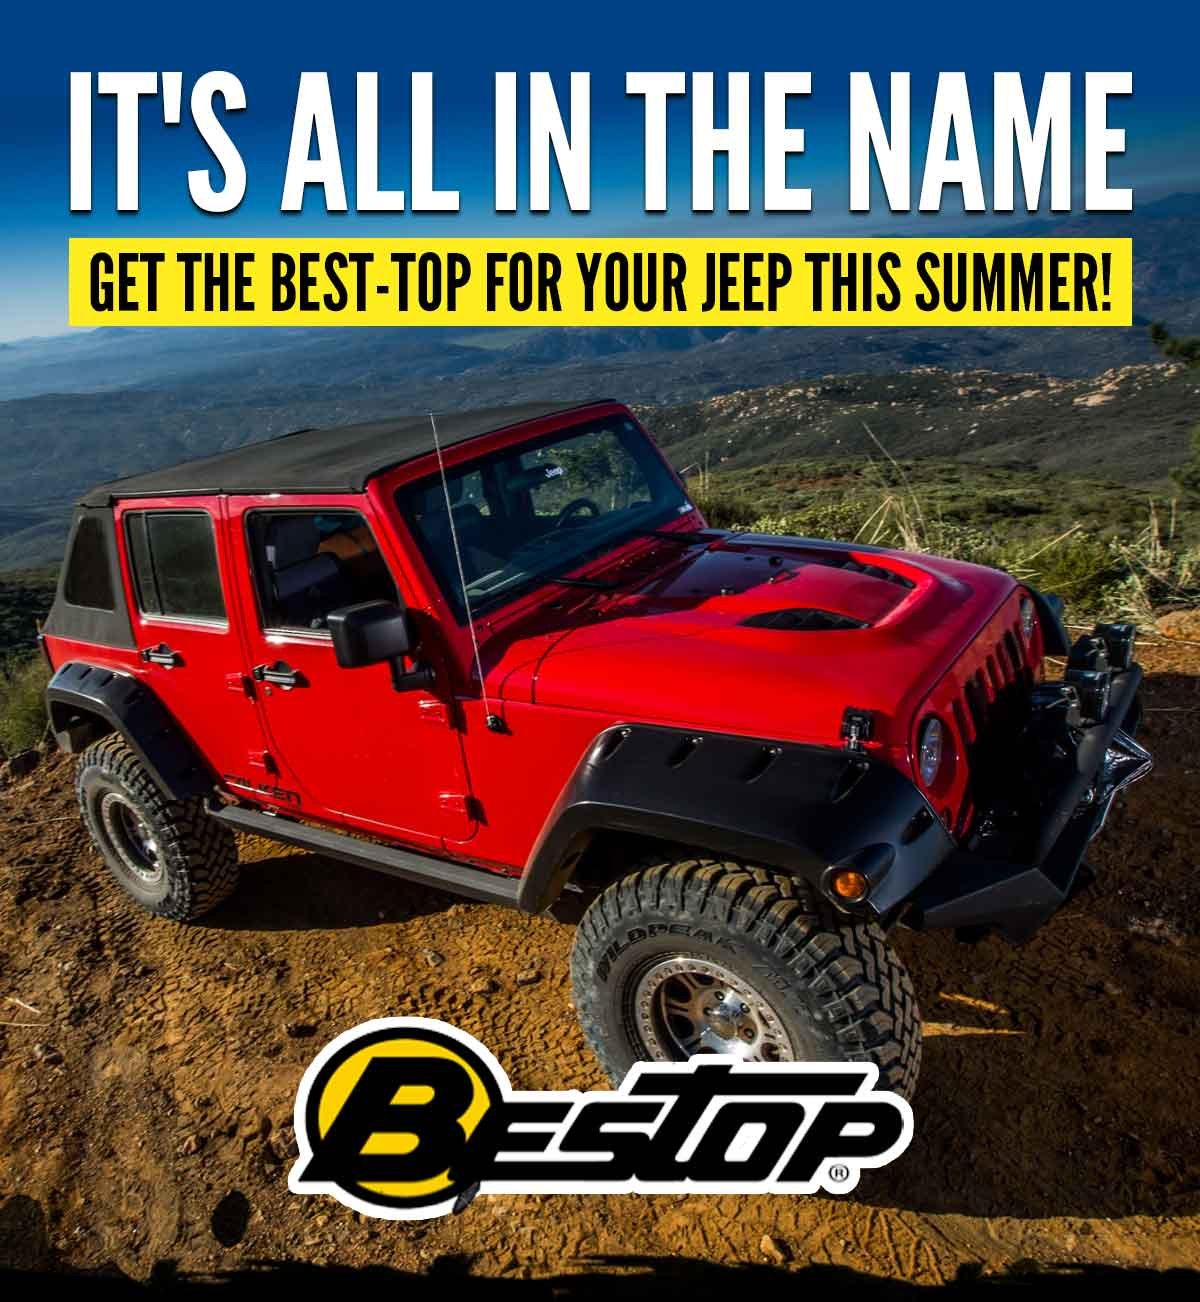 It's All In The Name. Get The BEST-TOP For Your Jeep This Summer!